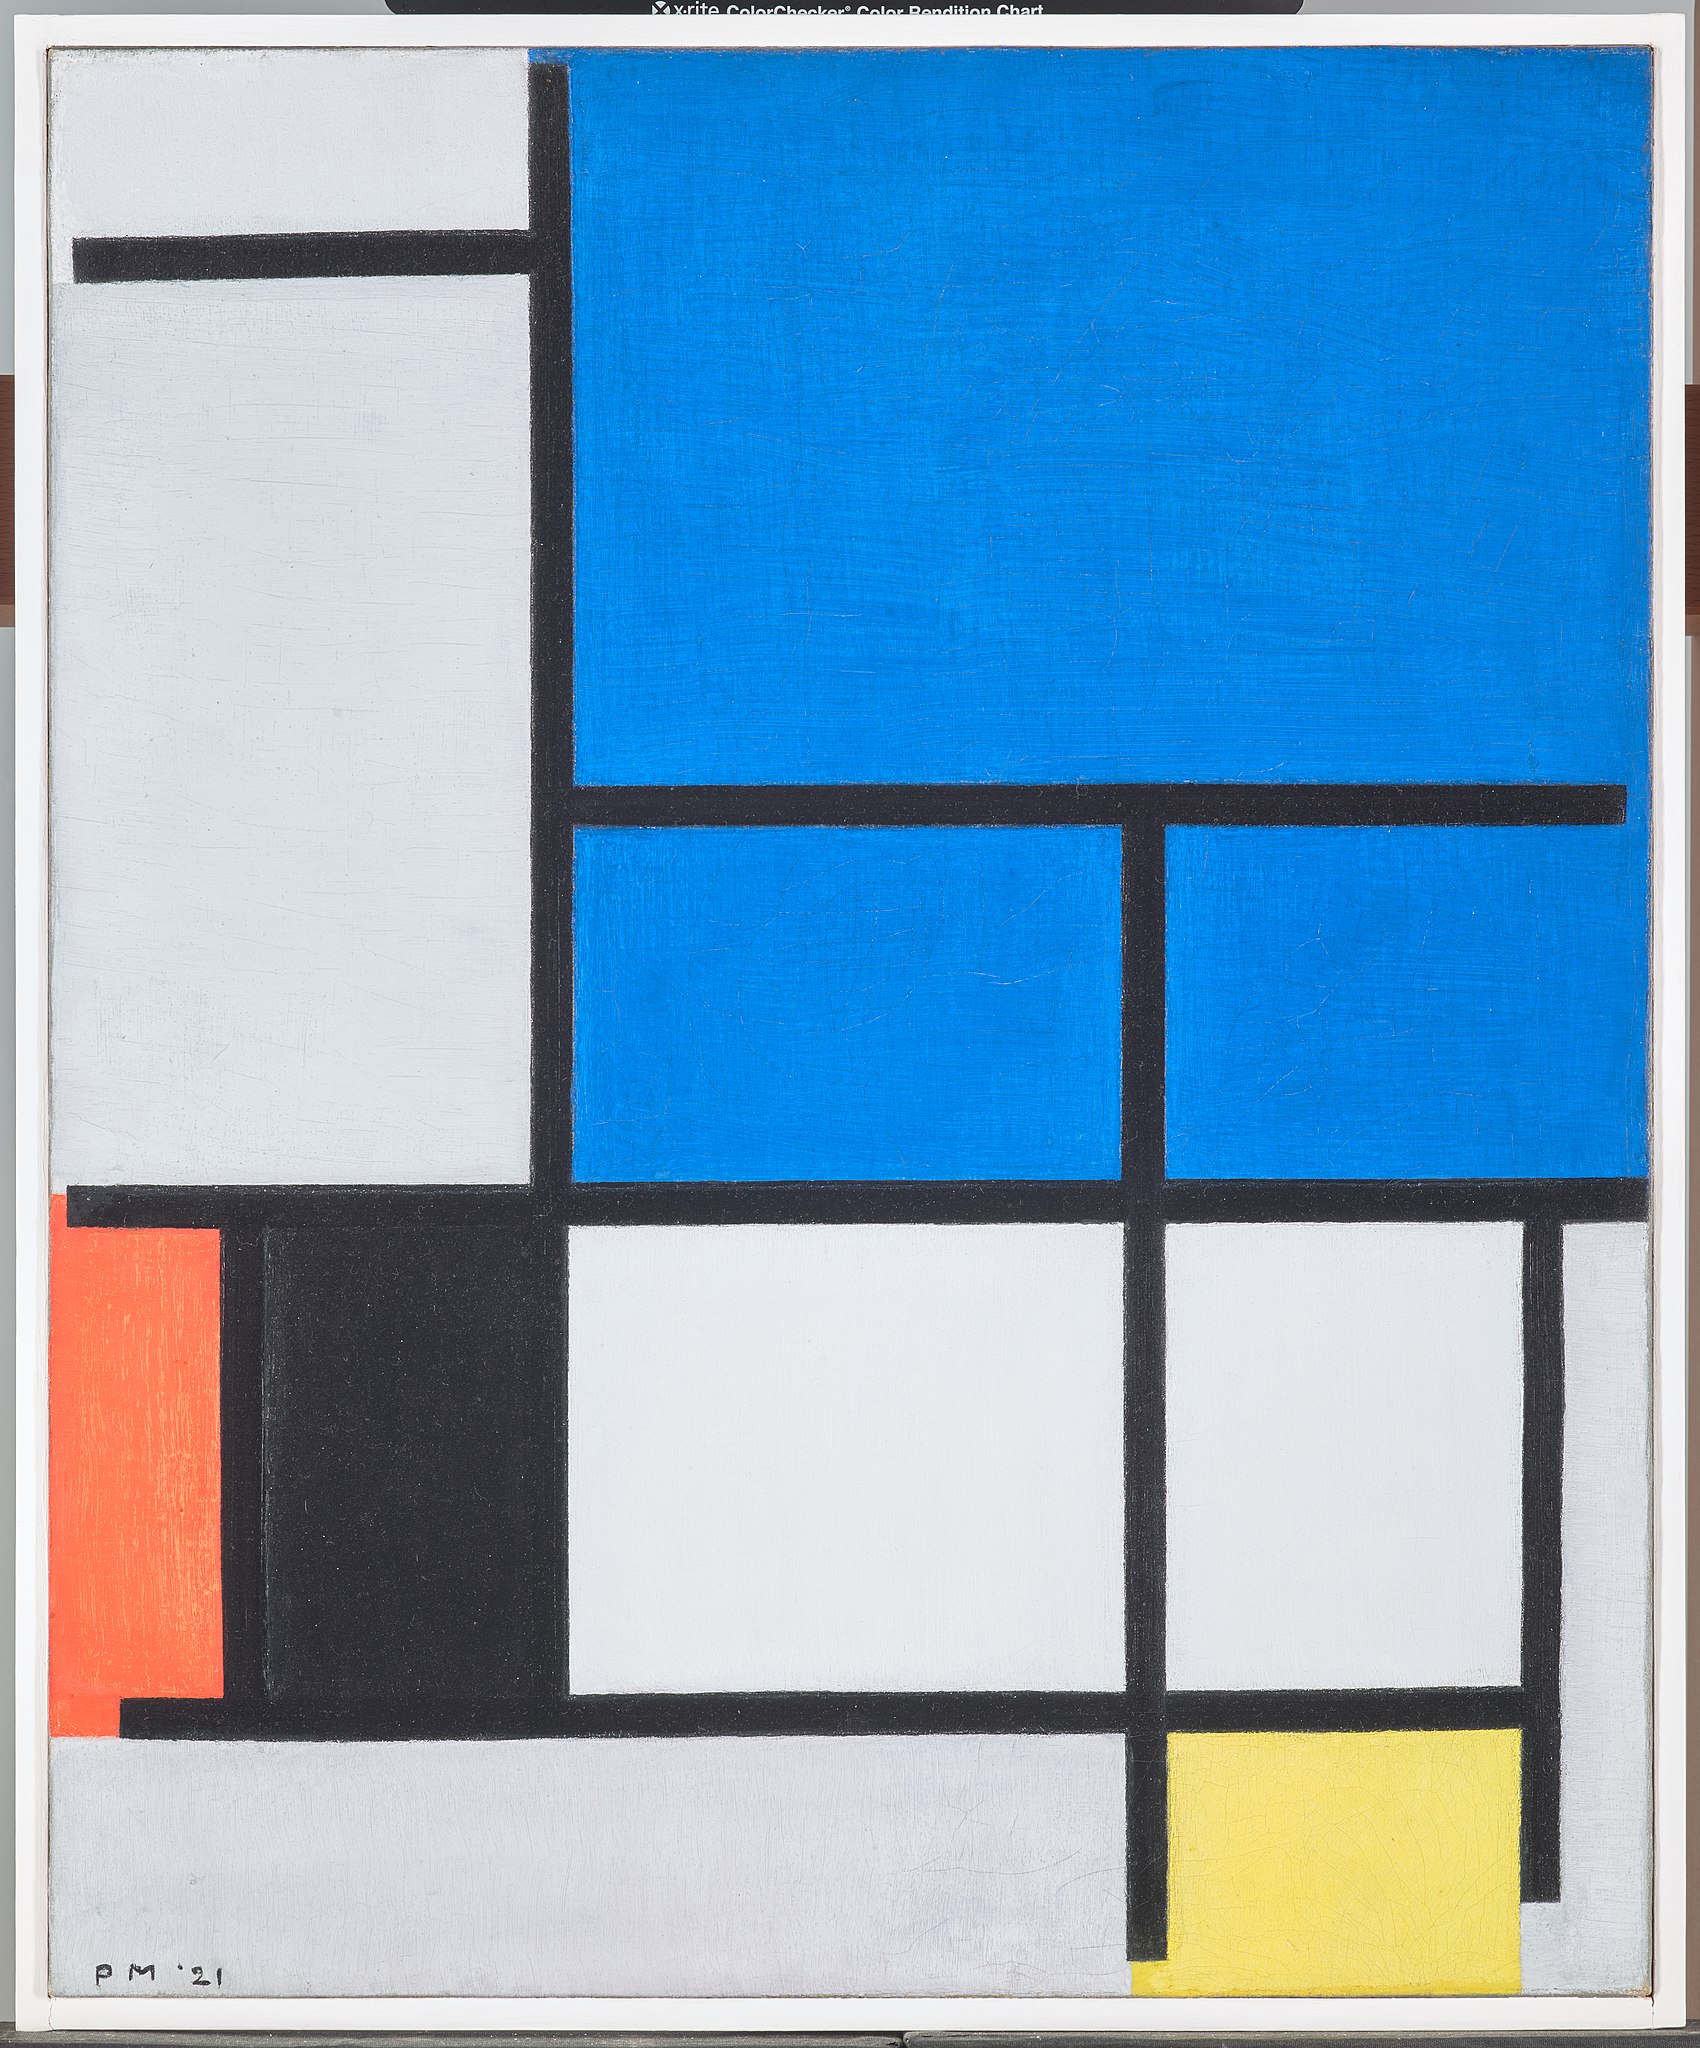 støbt uddannelse udeladt File:Piet Mondrian - Composition with Large Blue Plane, Red, Black, Yellow,  and Gray - 1984.200.FA - Dallas Museum of Art.jpg - Wikimedia Commons